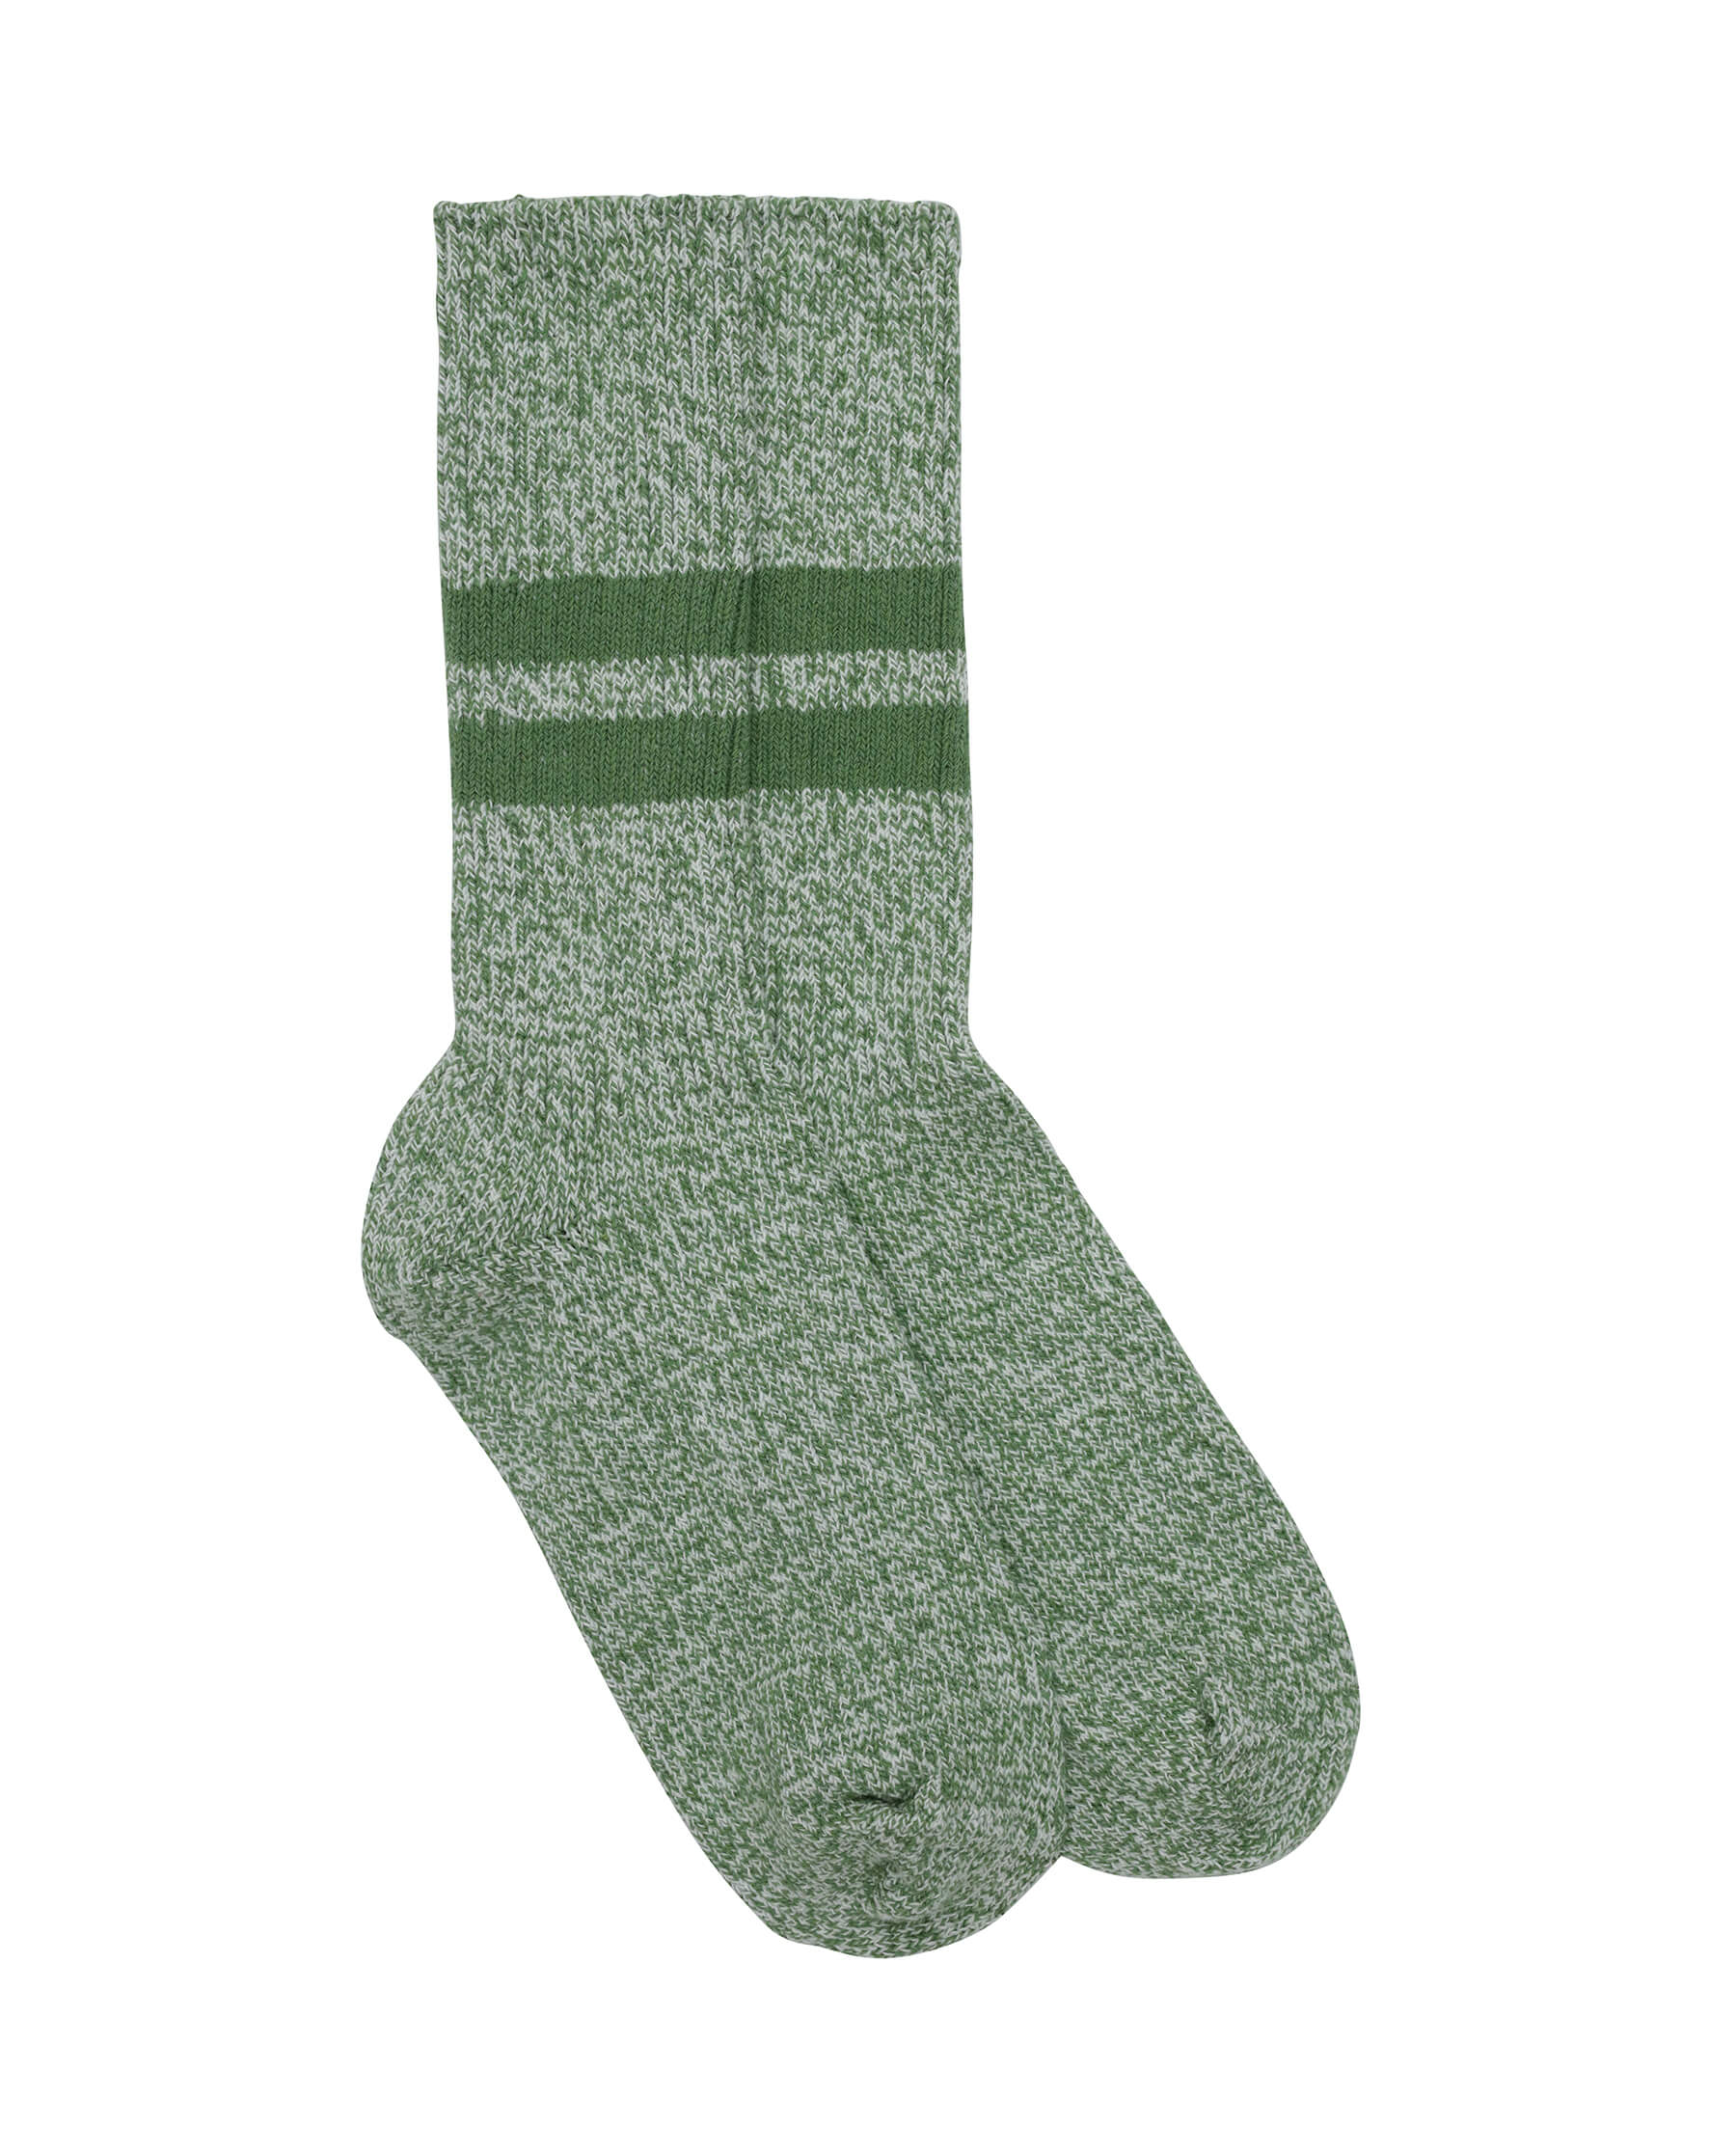 The Marled Athletic Sock. -- Army ACCESSORIES THE GREAT. FALL 23 ACCESSORIES